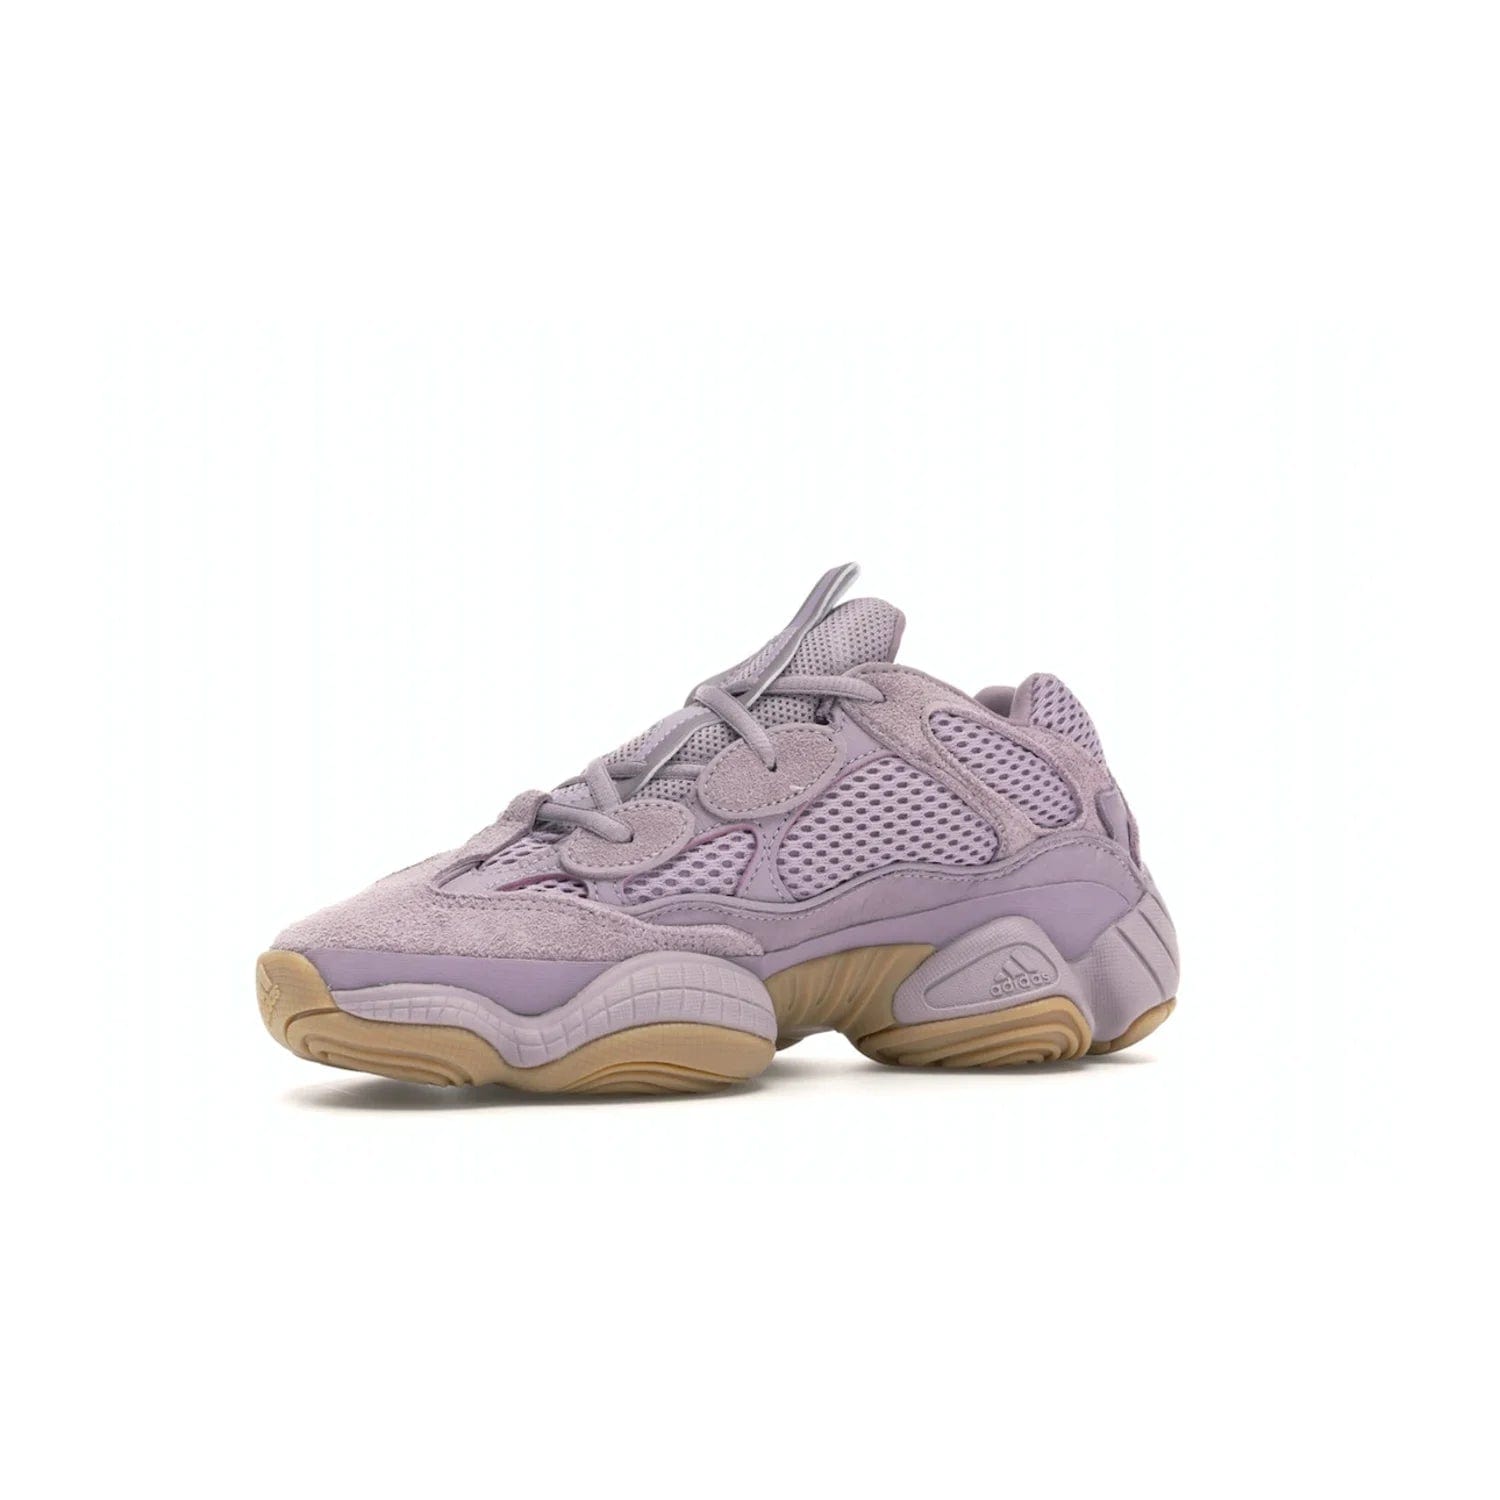 adidas Yeezy 500 Soft Vision - Image 16 - Only at www.BallersClubKickz.com - New adidas Yeezy 500 Soft Vision sneaker featuring a combination of mesh, leather, and suede in a classic Soft Vision colorway. Gum rubber outsole ensures durability and traction. An everyday sneaker that stands out from the crowd.